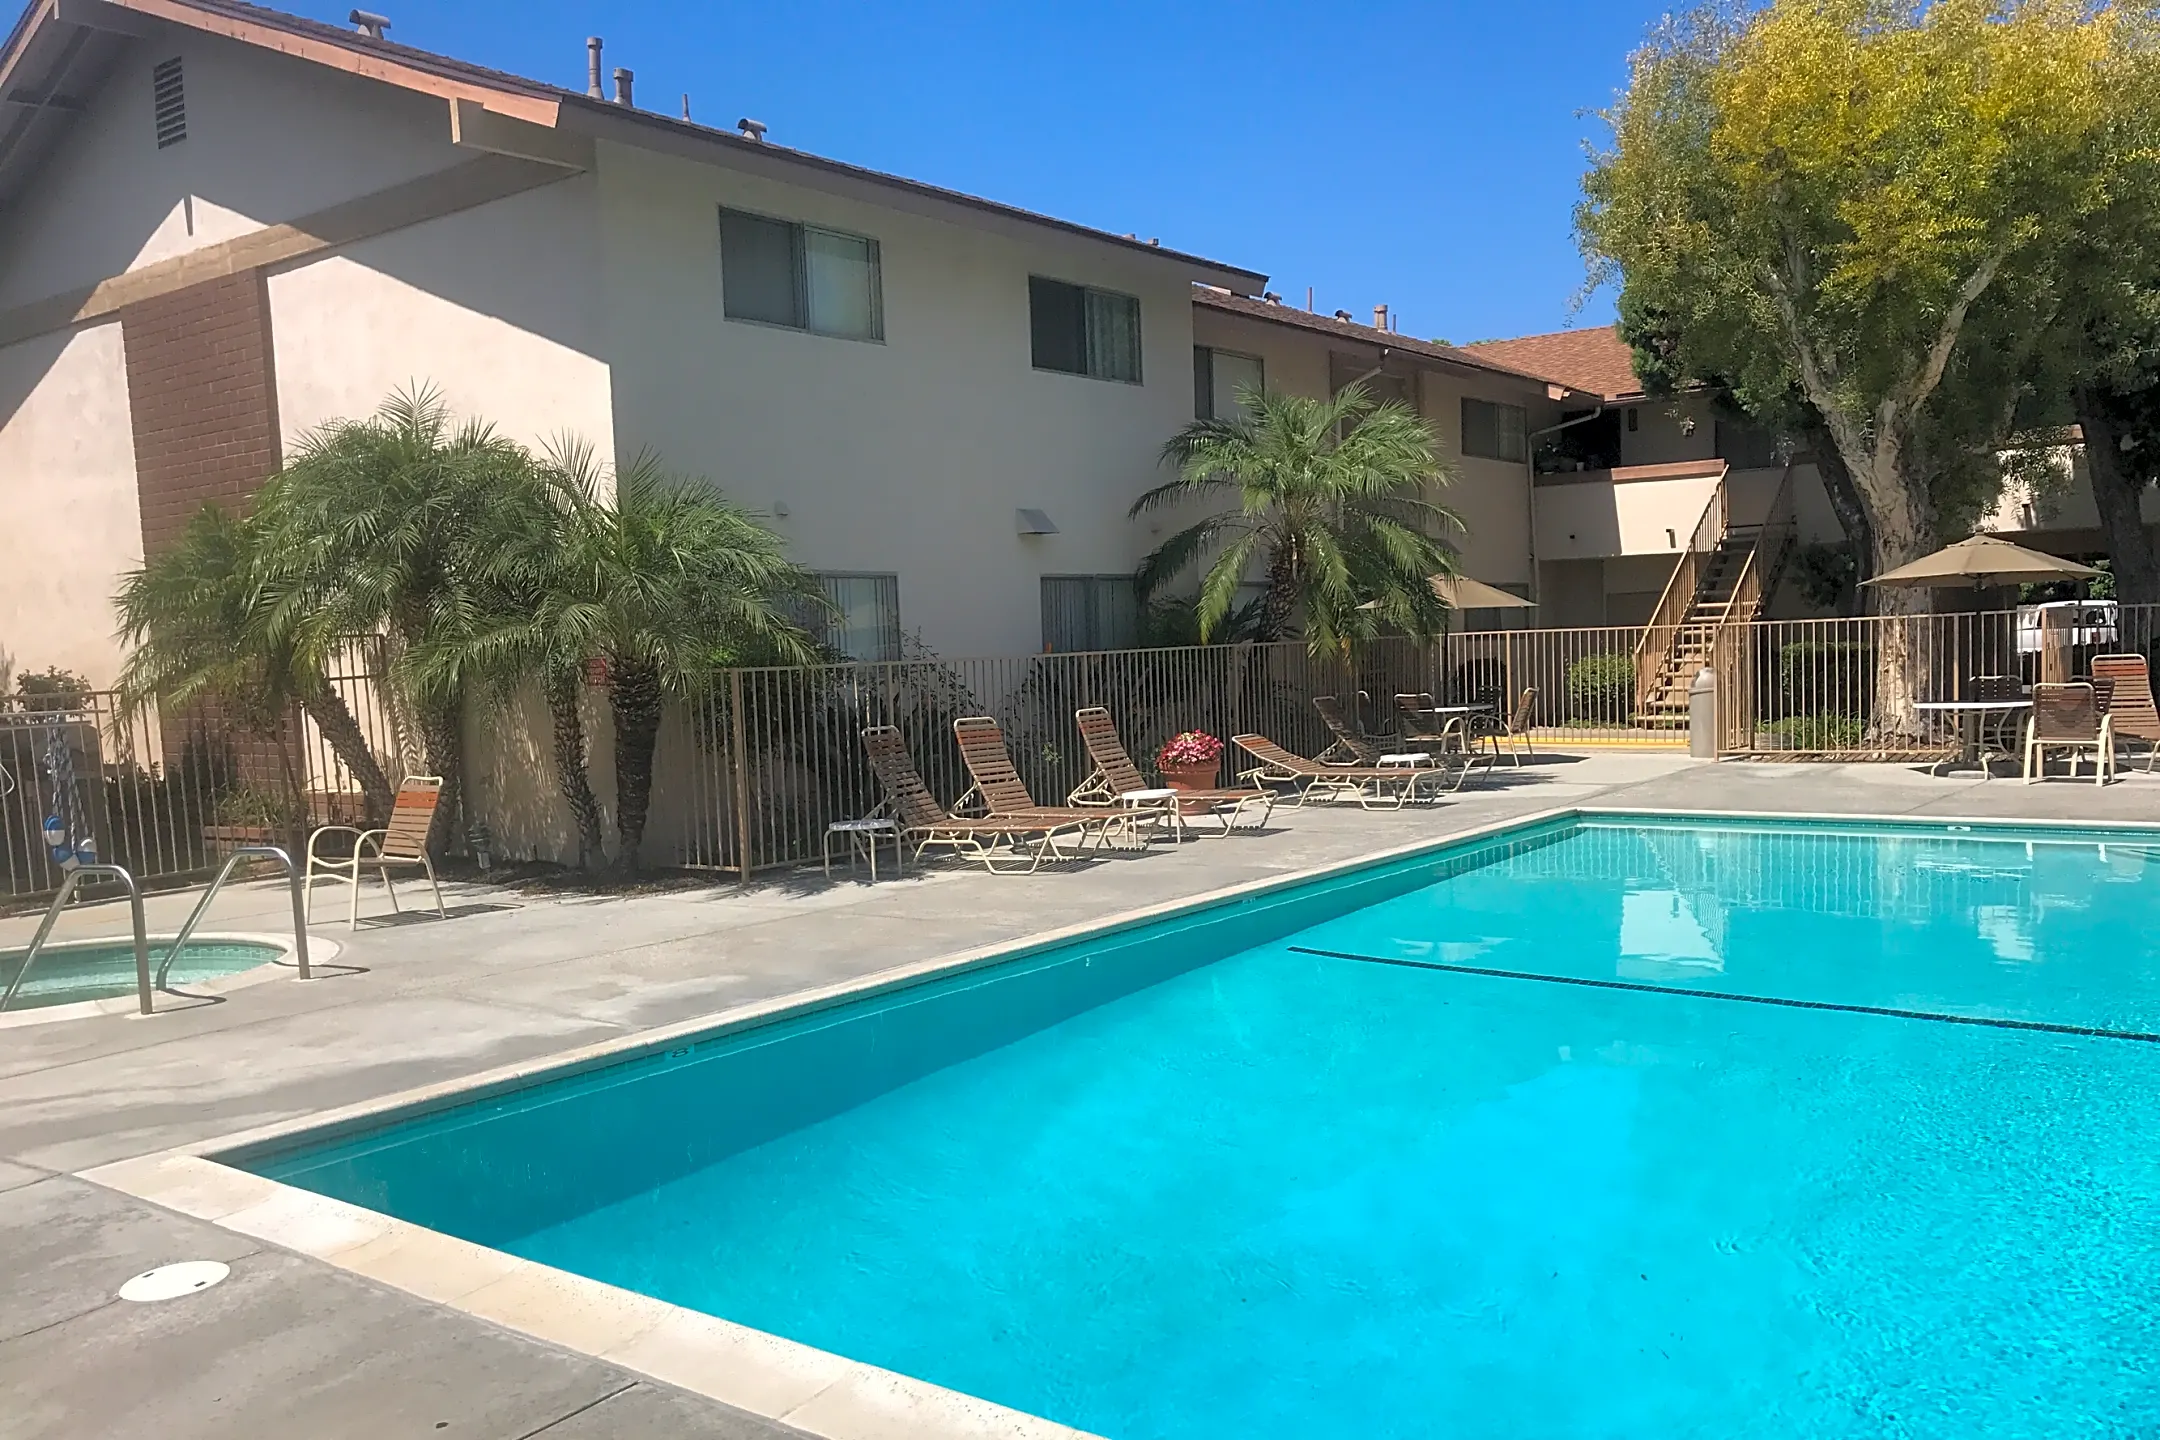 Monterey, The - 1762 Sherry Ln | Santa Ana, CA Apartments for Rent | Rent.